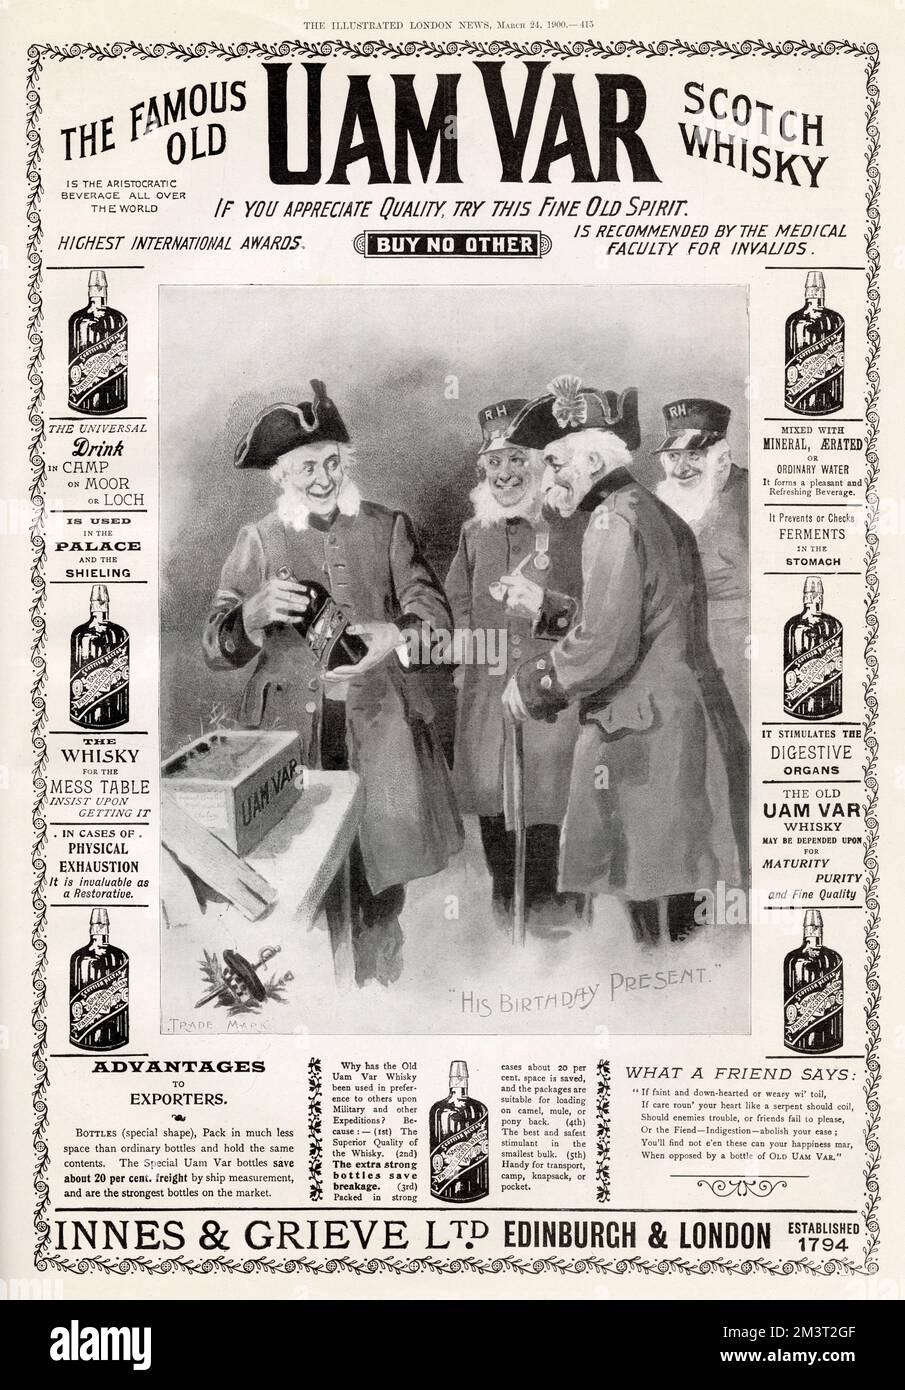 The Famous Old Uam Var Scotch Whisky. Advert featuring a birthday among the Chelsea Pensioners. Stock Photo